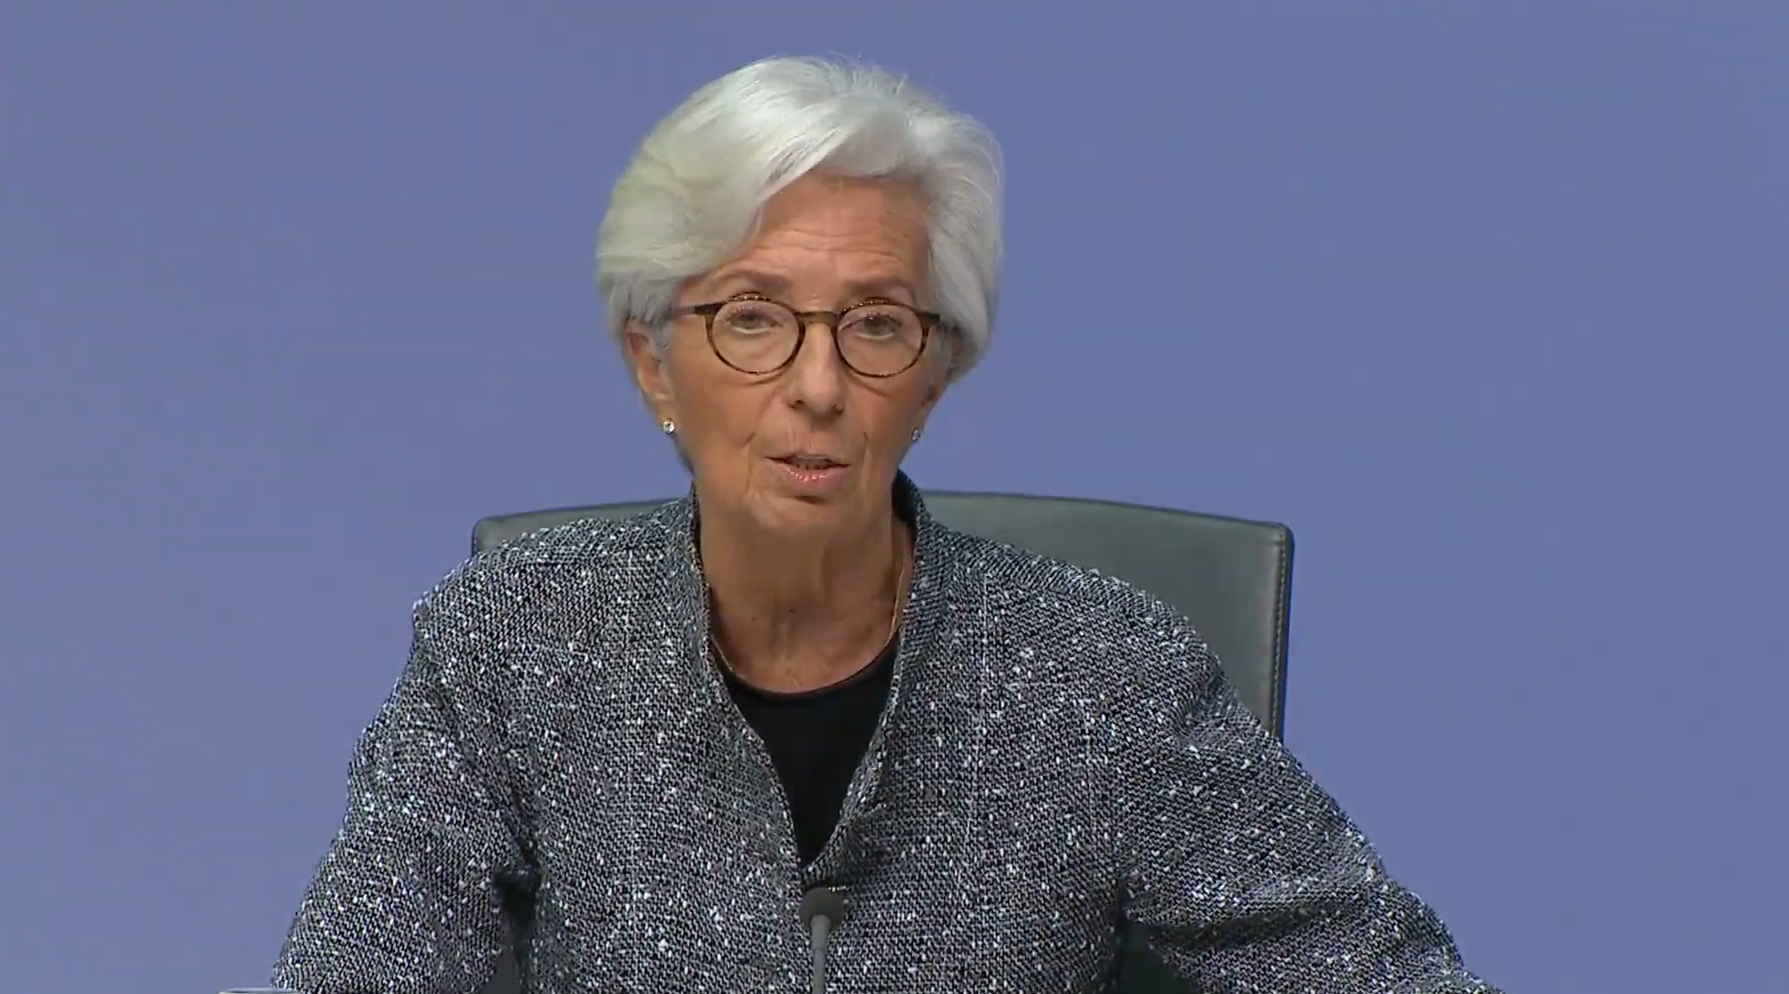 European Central Bank President Christine Lagarde commented on the ongoing negotiations at the EU leaders summit